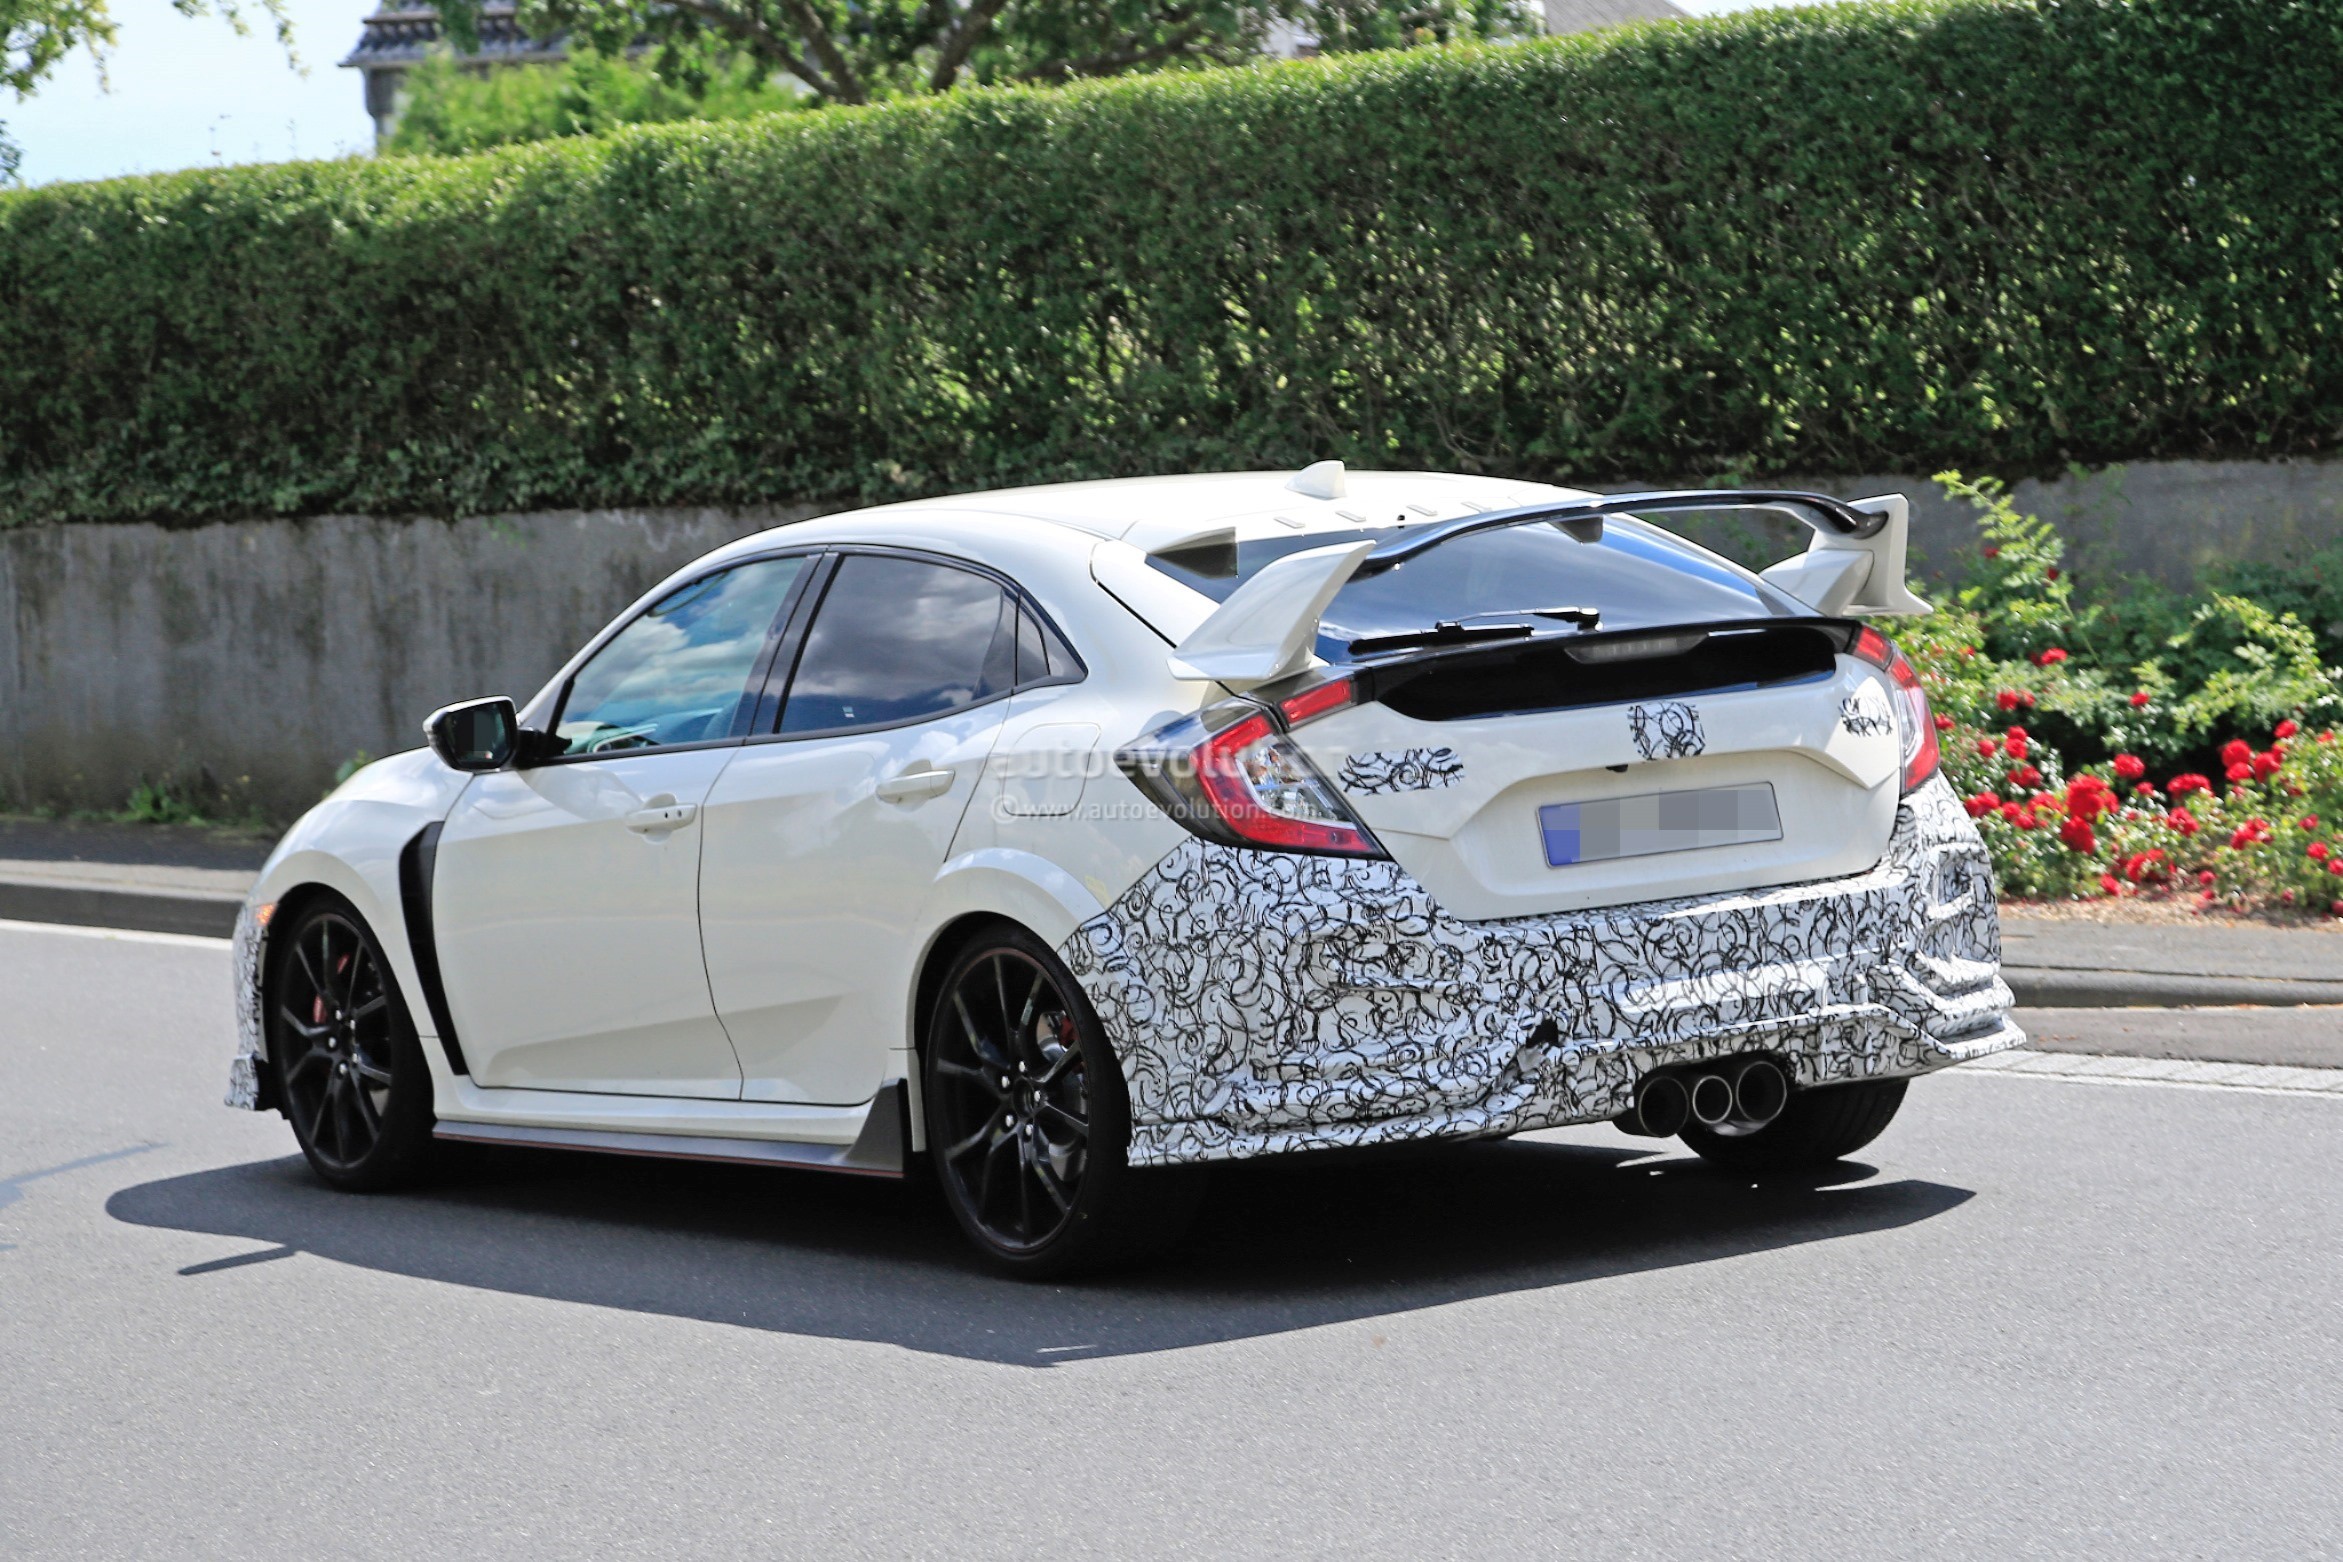 2019 Honda Civic Type R Spied For the First Time - autoevolution